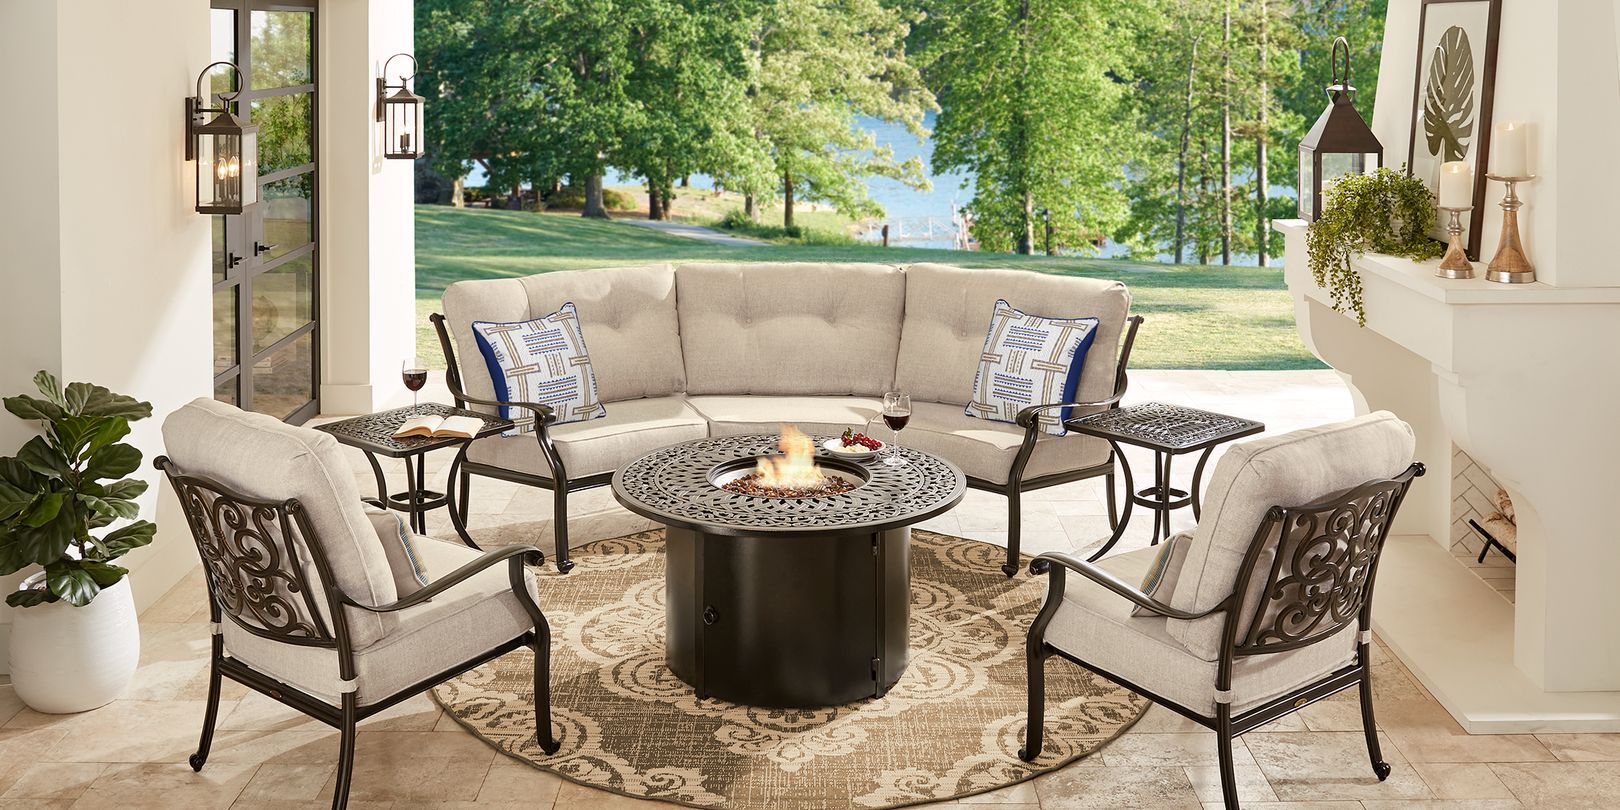 Fire pit with sofa and chairs